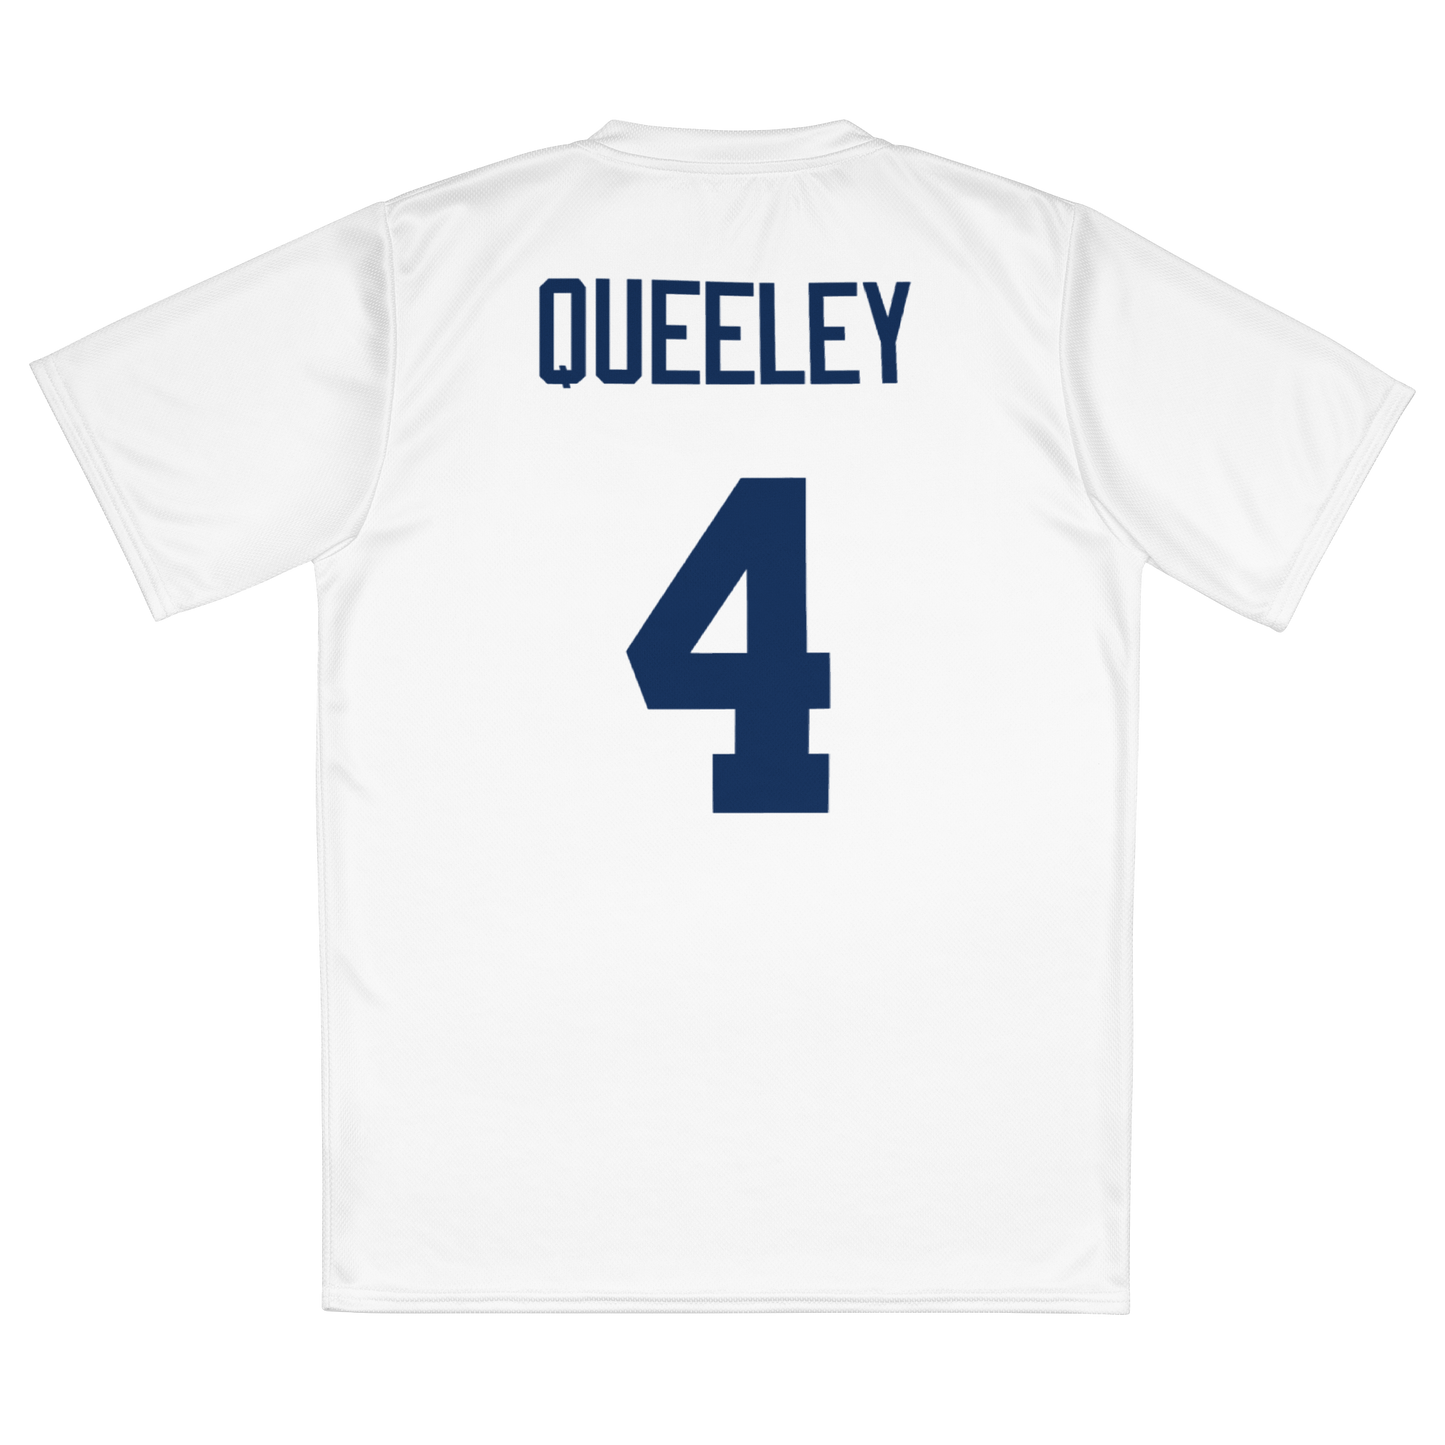 QUEELEY AWAY SHIRTSY